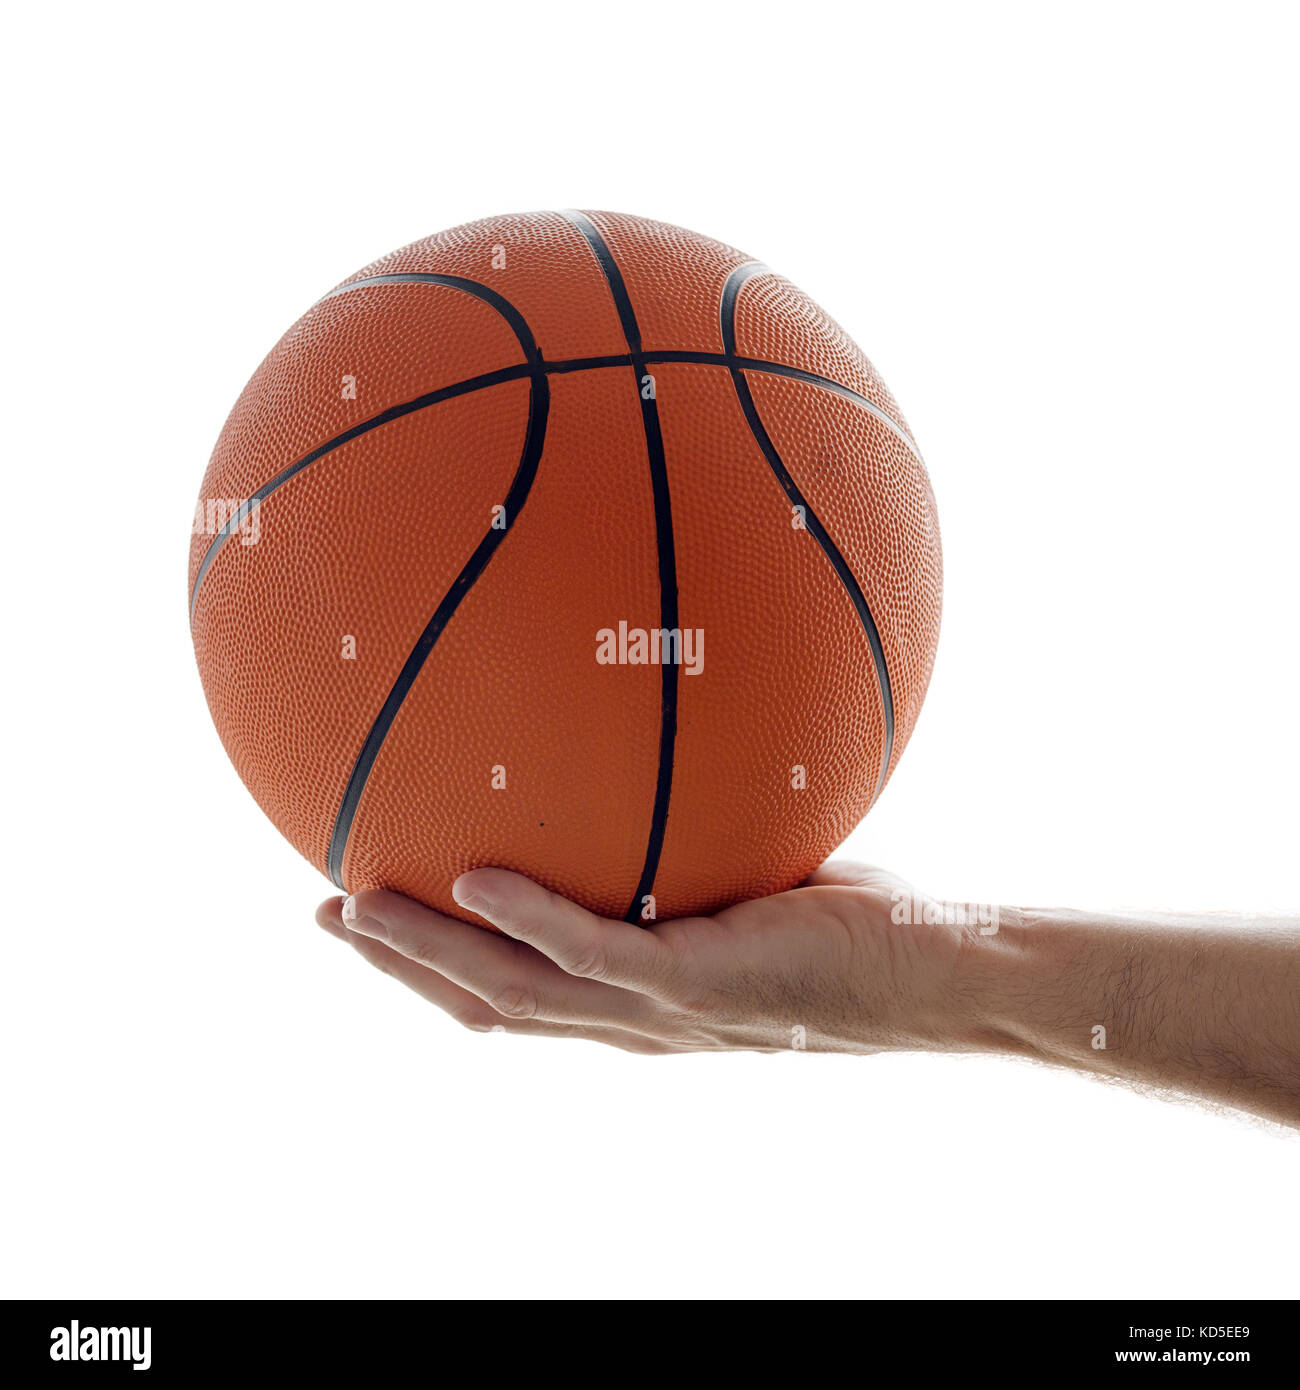 Sport and recreation, man holding basketball. Isolated on white background. Stock Photo